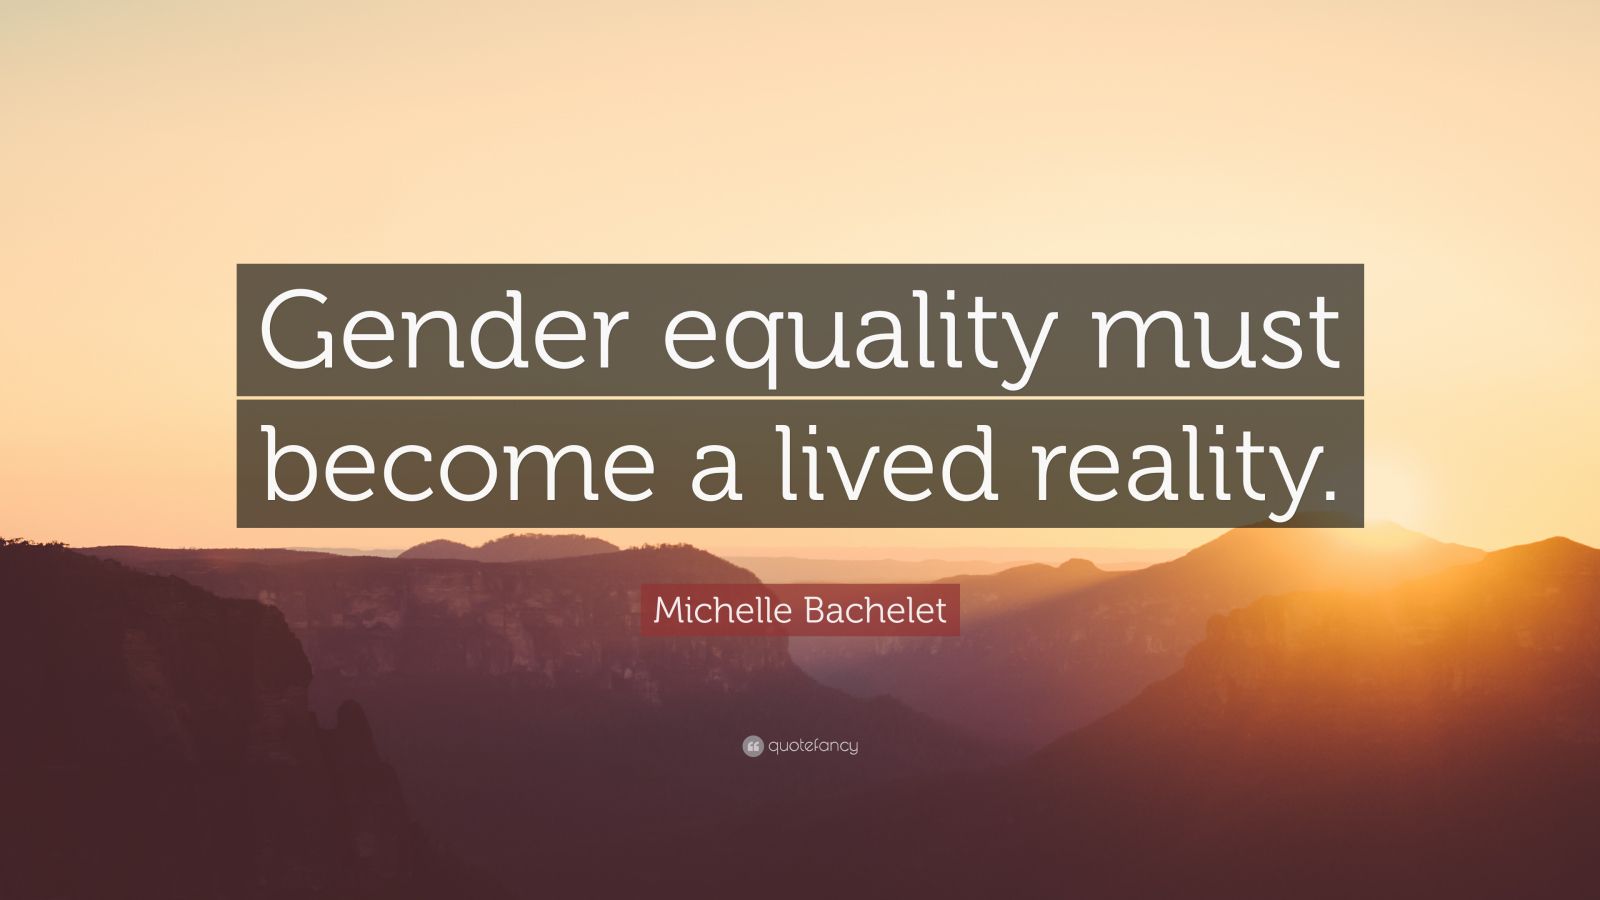 Michelle Bachelet Quote: “Gender equality must become a lived reality